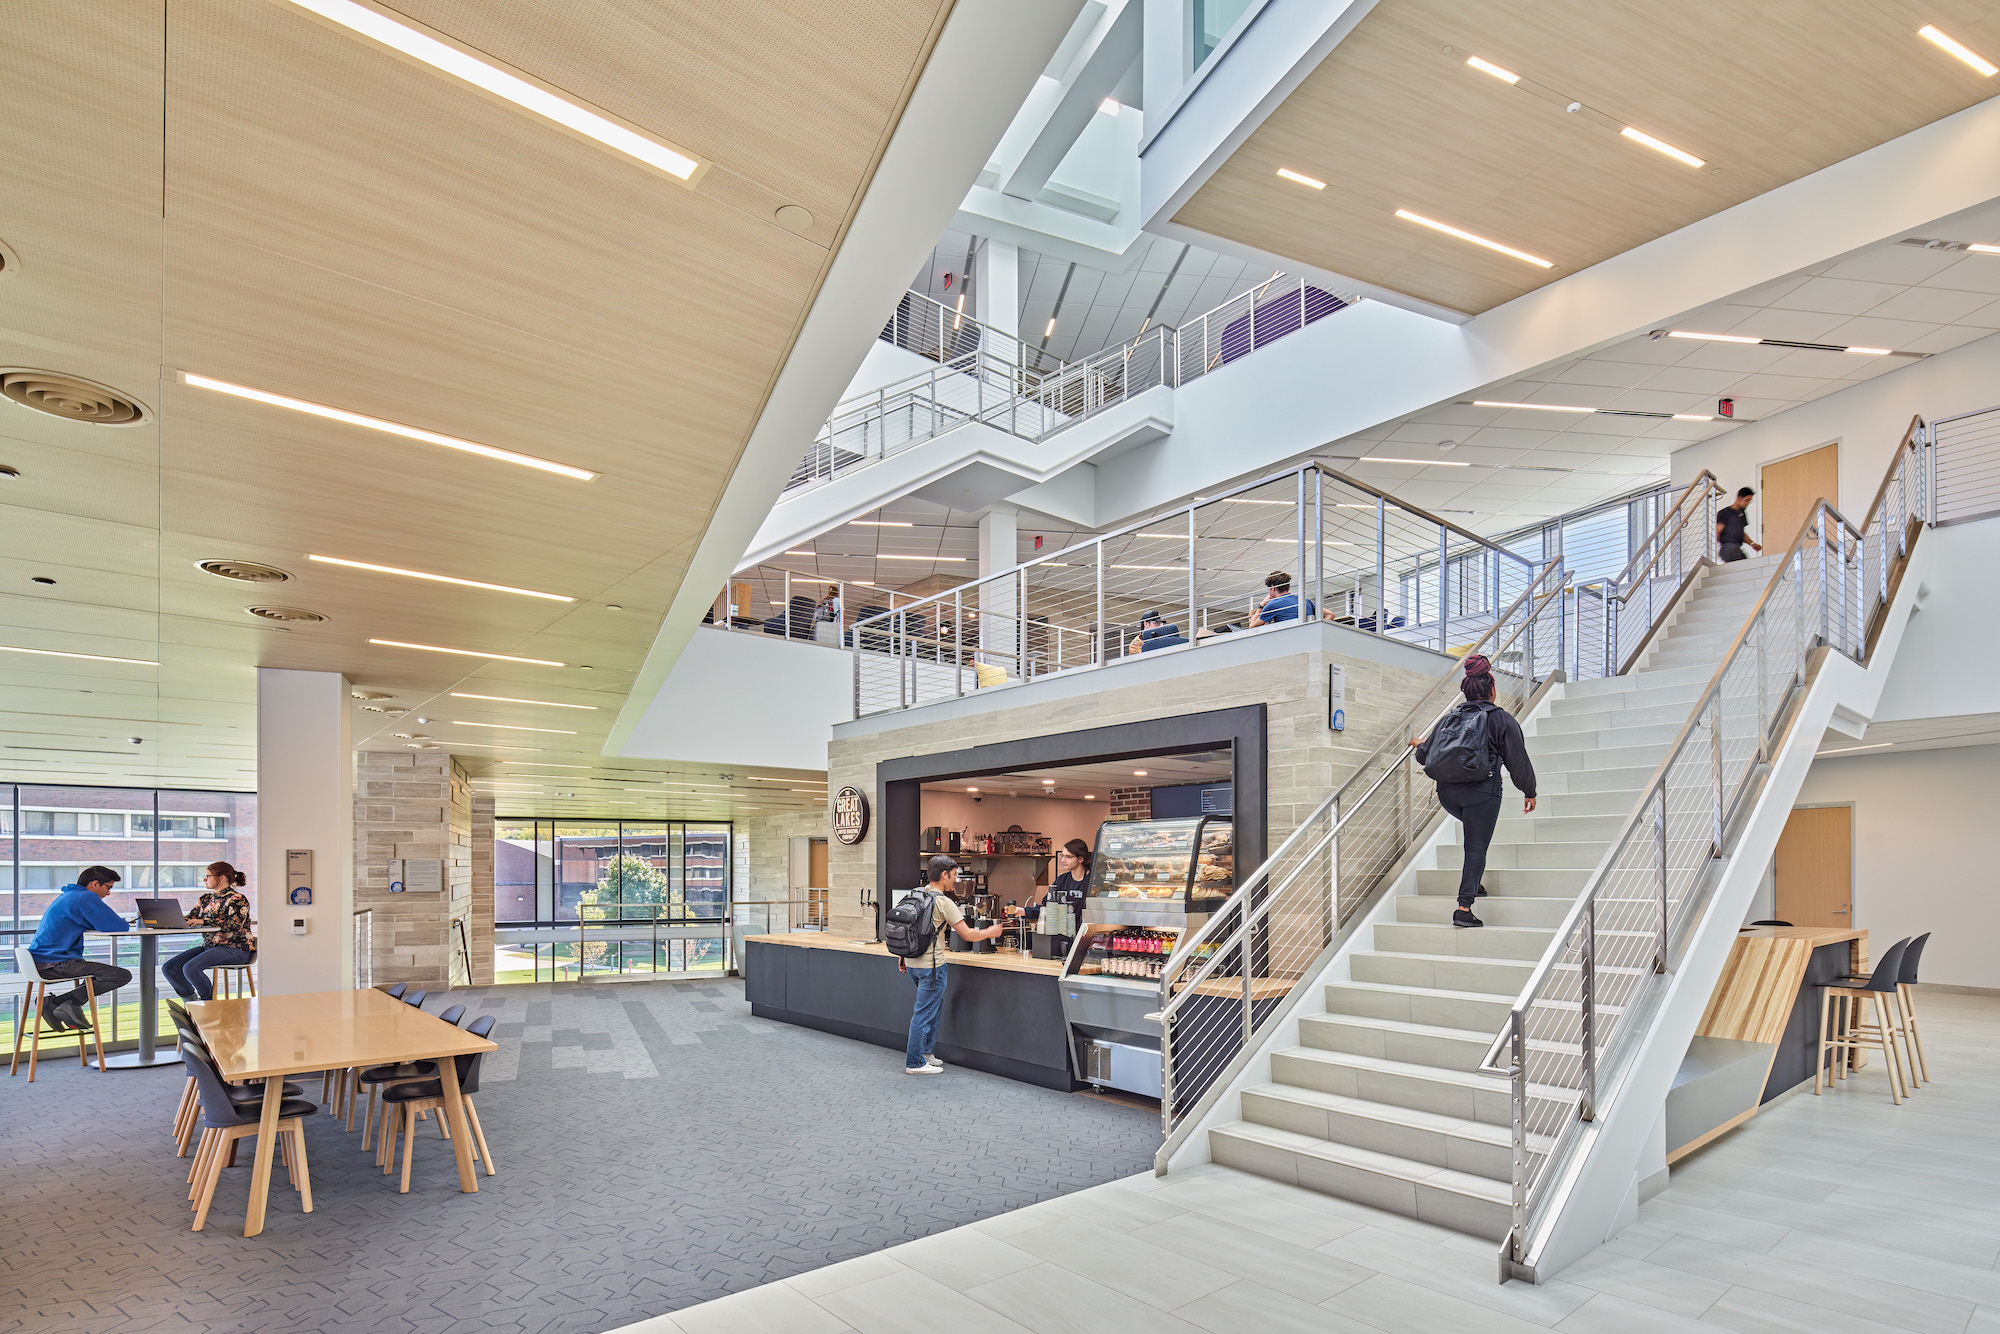 Kettering University Learning Commons designed by Stantec, Jason Keen Photography 5 .jpeg